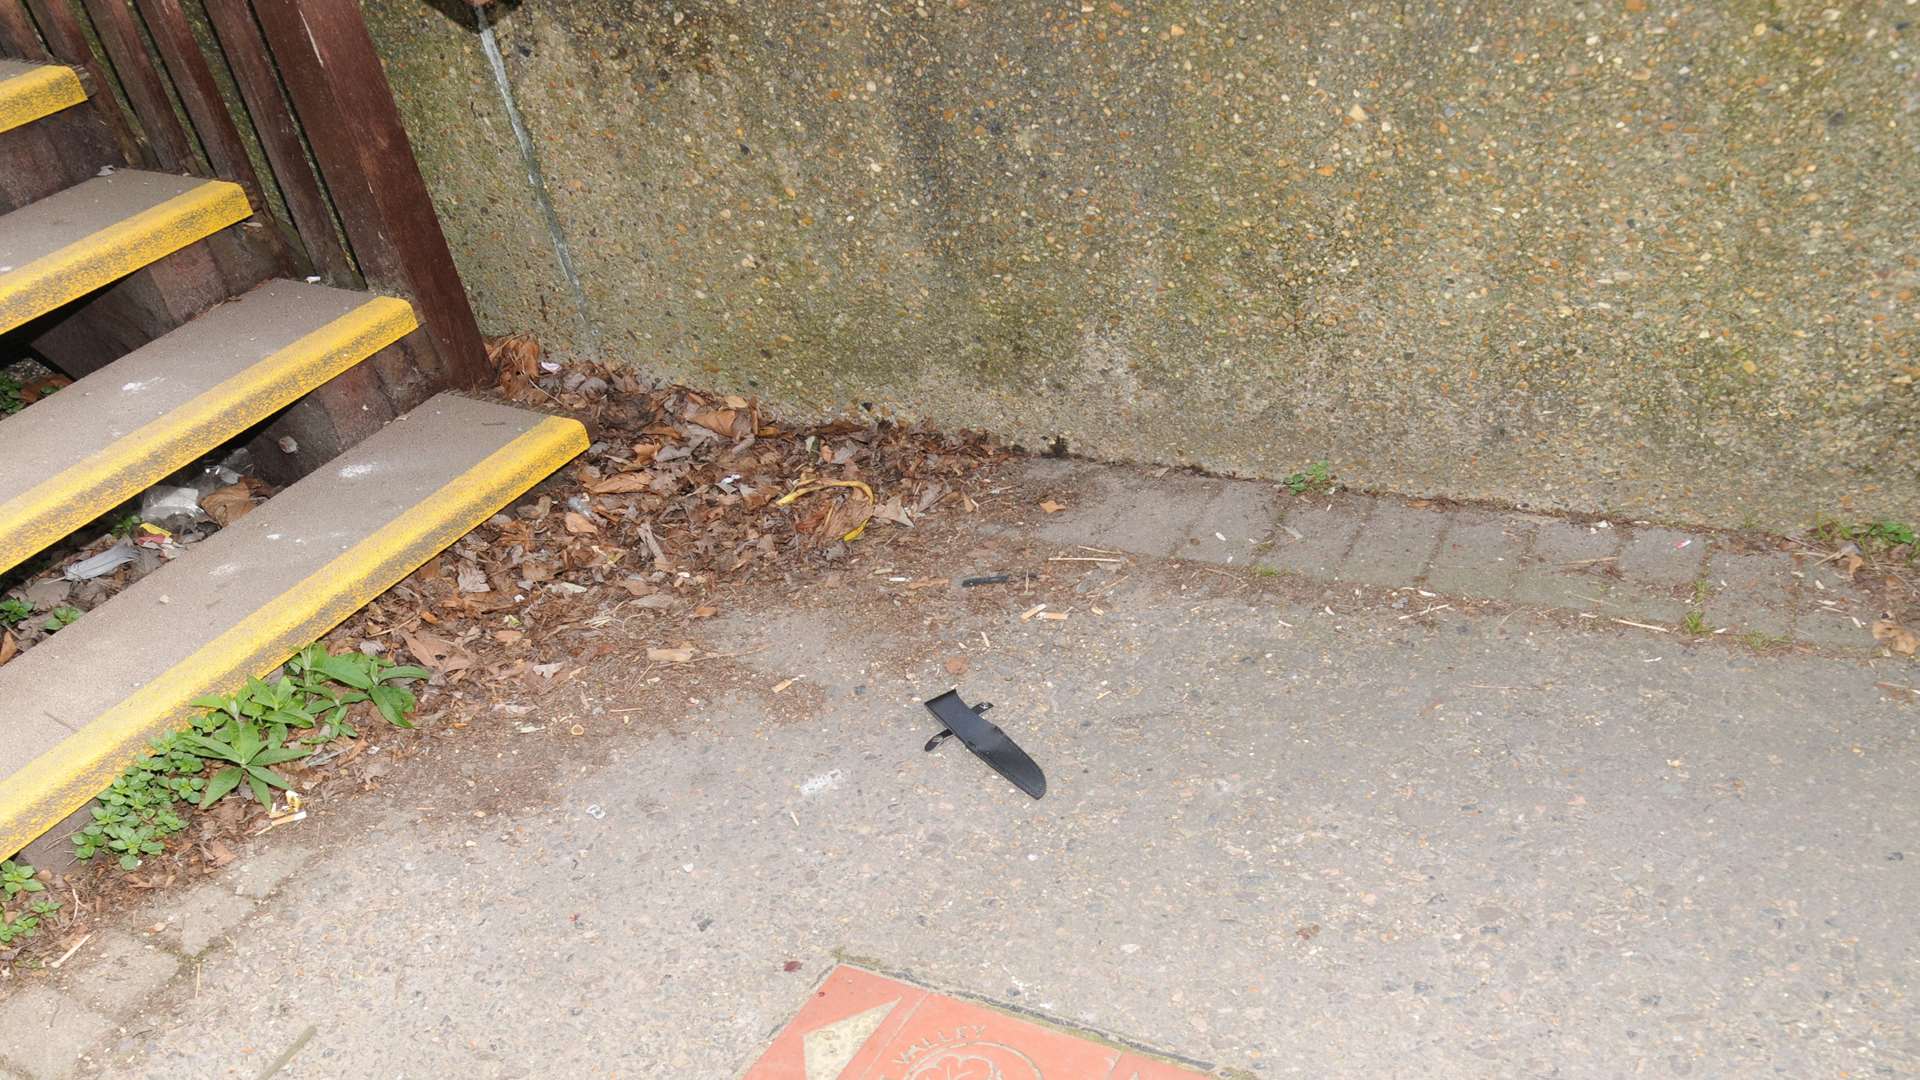 An image of the knife sheath found at the scene. Picture: Kent Police